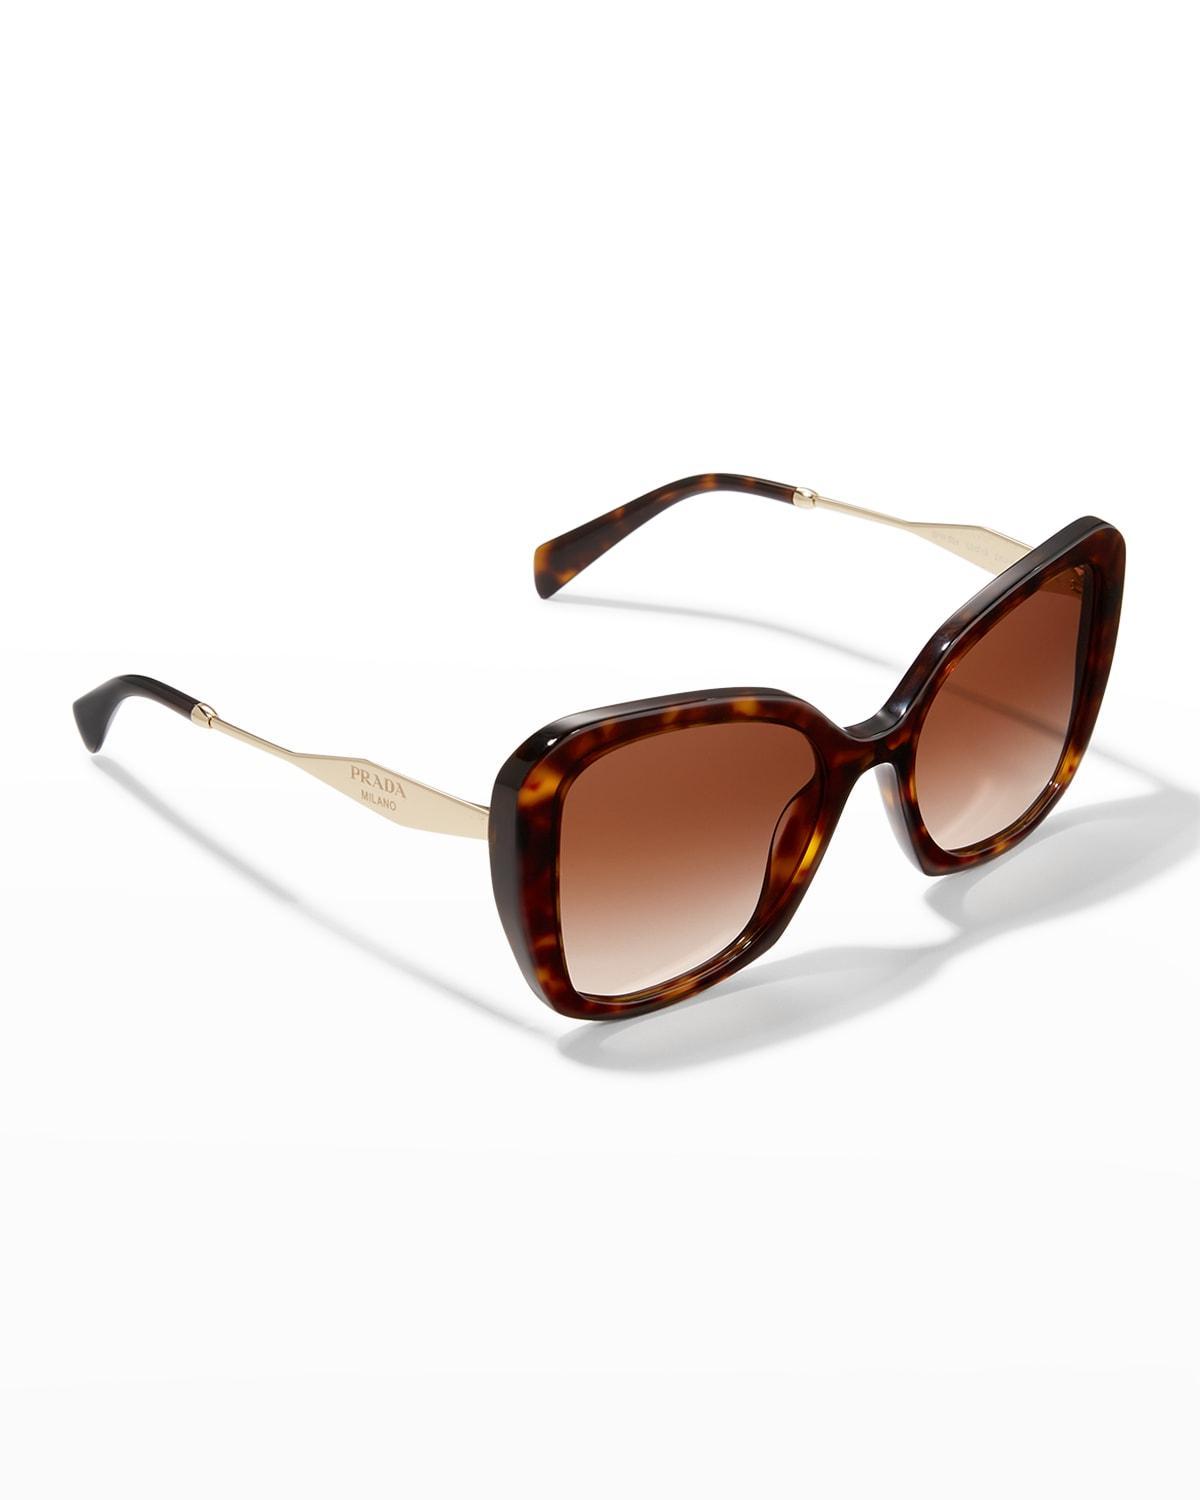 Prada 53mm Butterfly Sunglasses Product Image